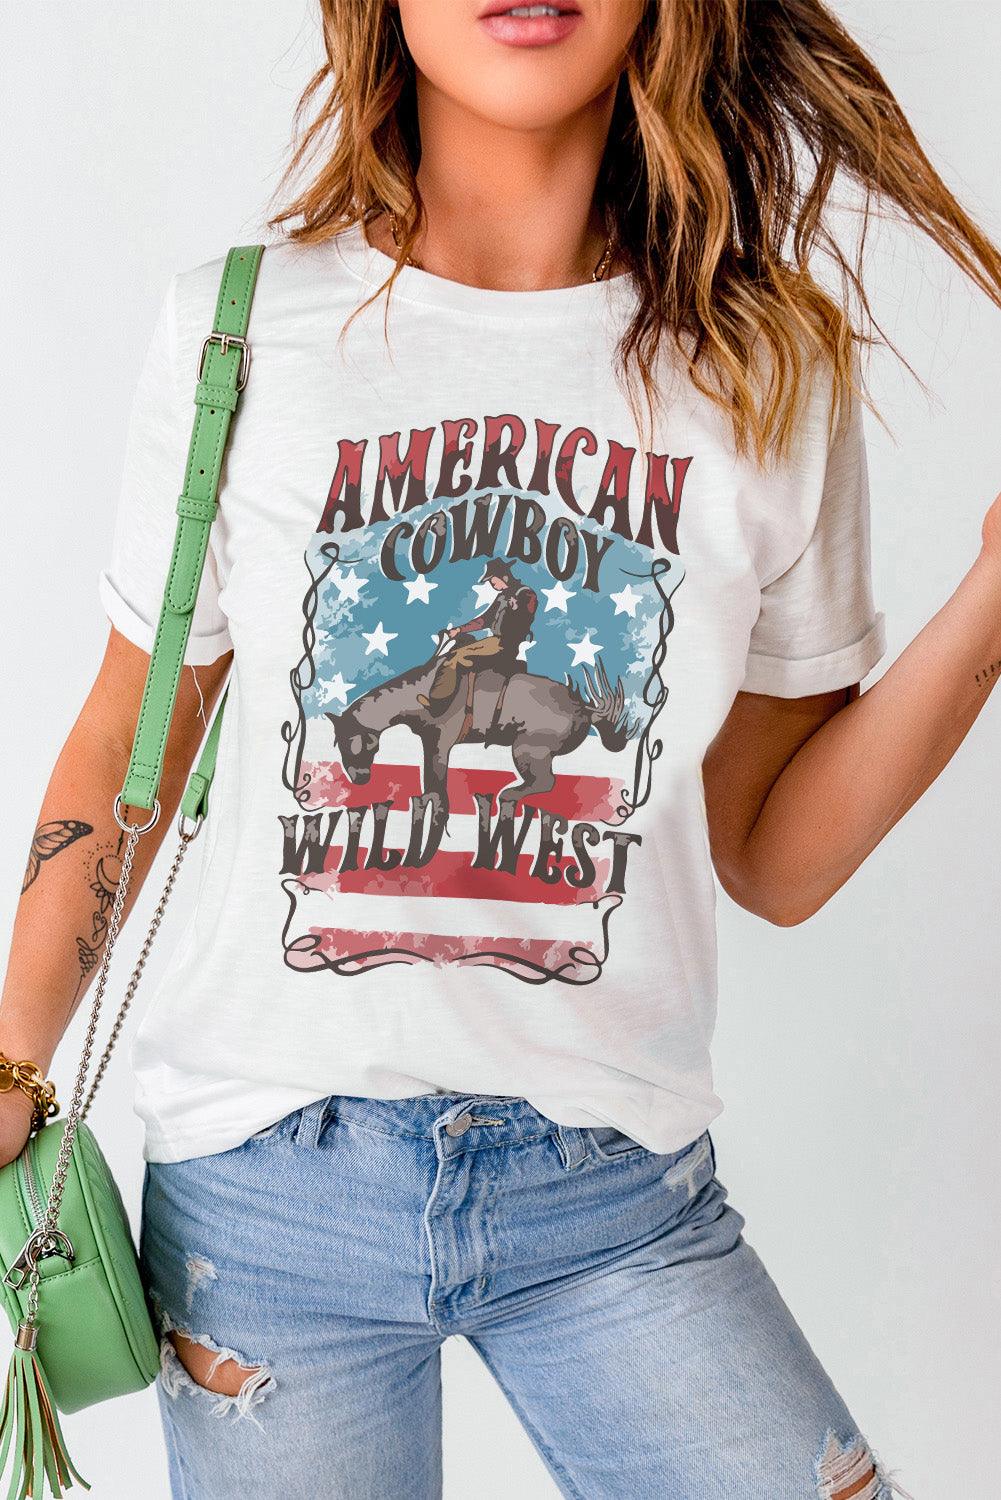 AMERICAN COWBOY WILD WEST Tee Shirt - Olive Ave